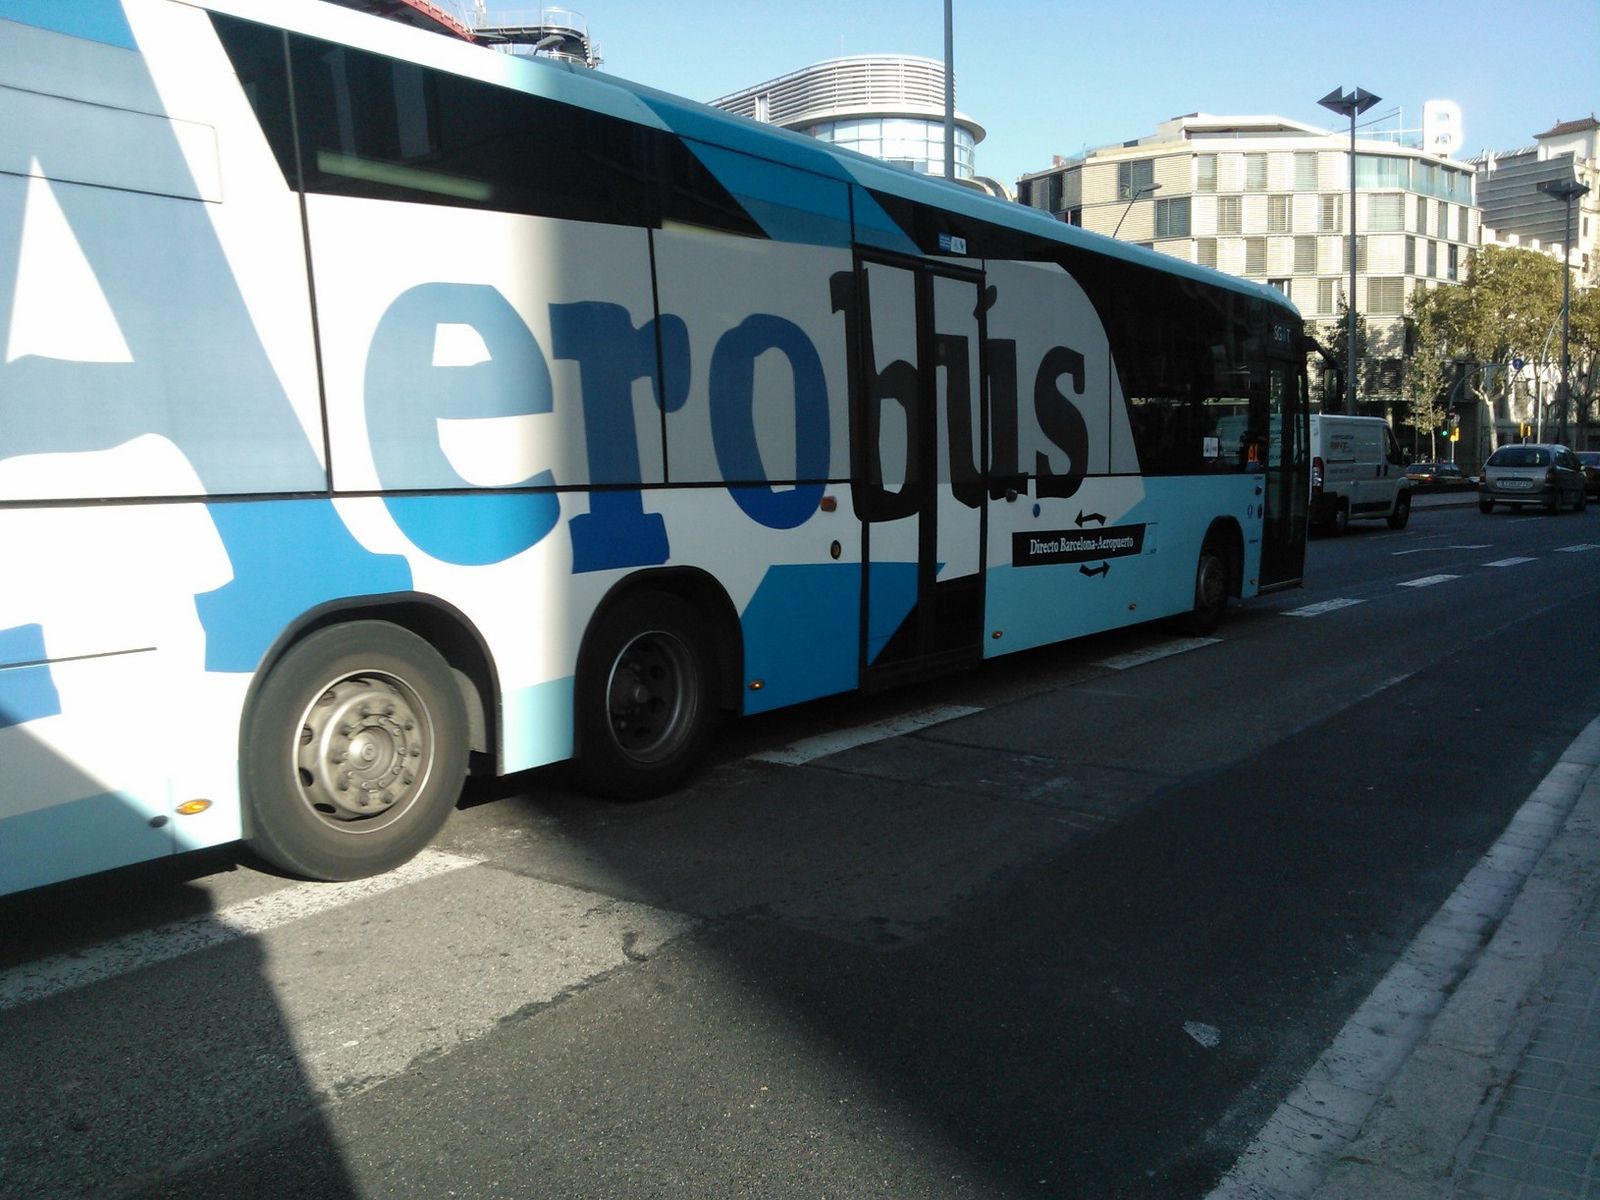 AEROBUS Barcelona - How to get from the Barcelona airport to city center